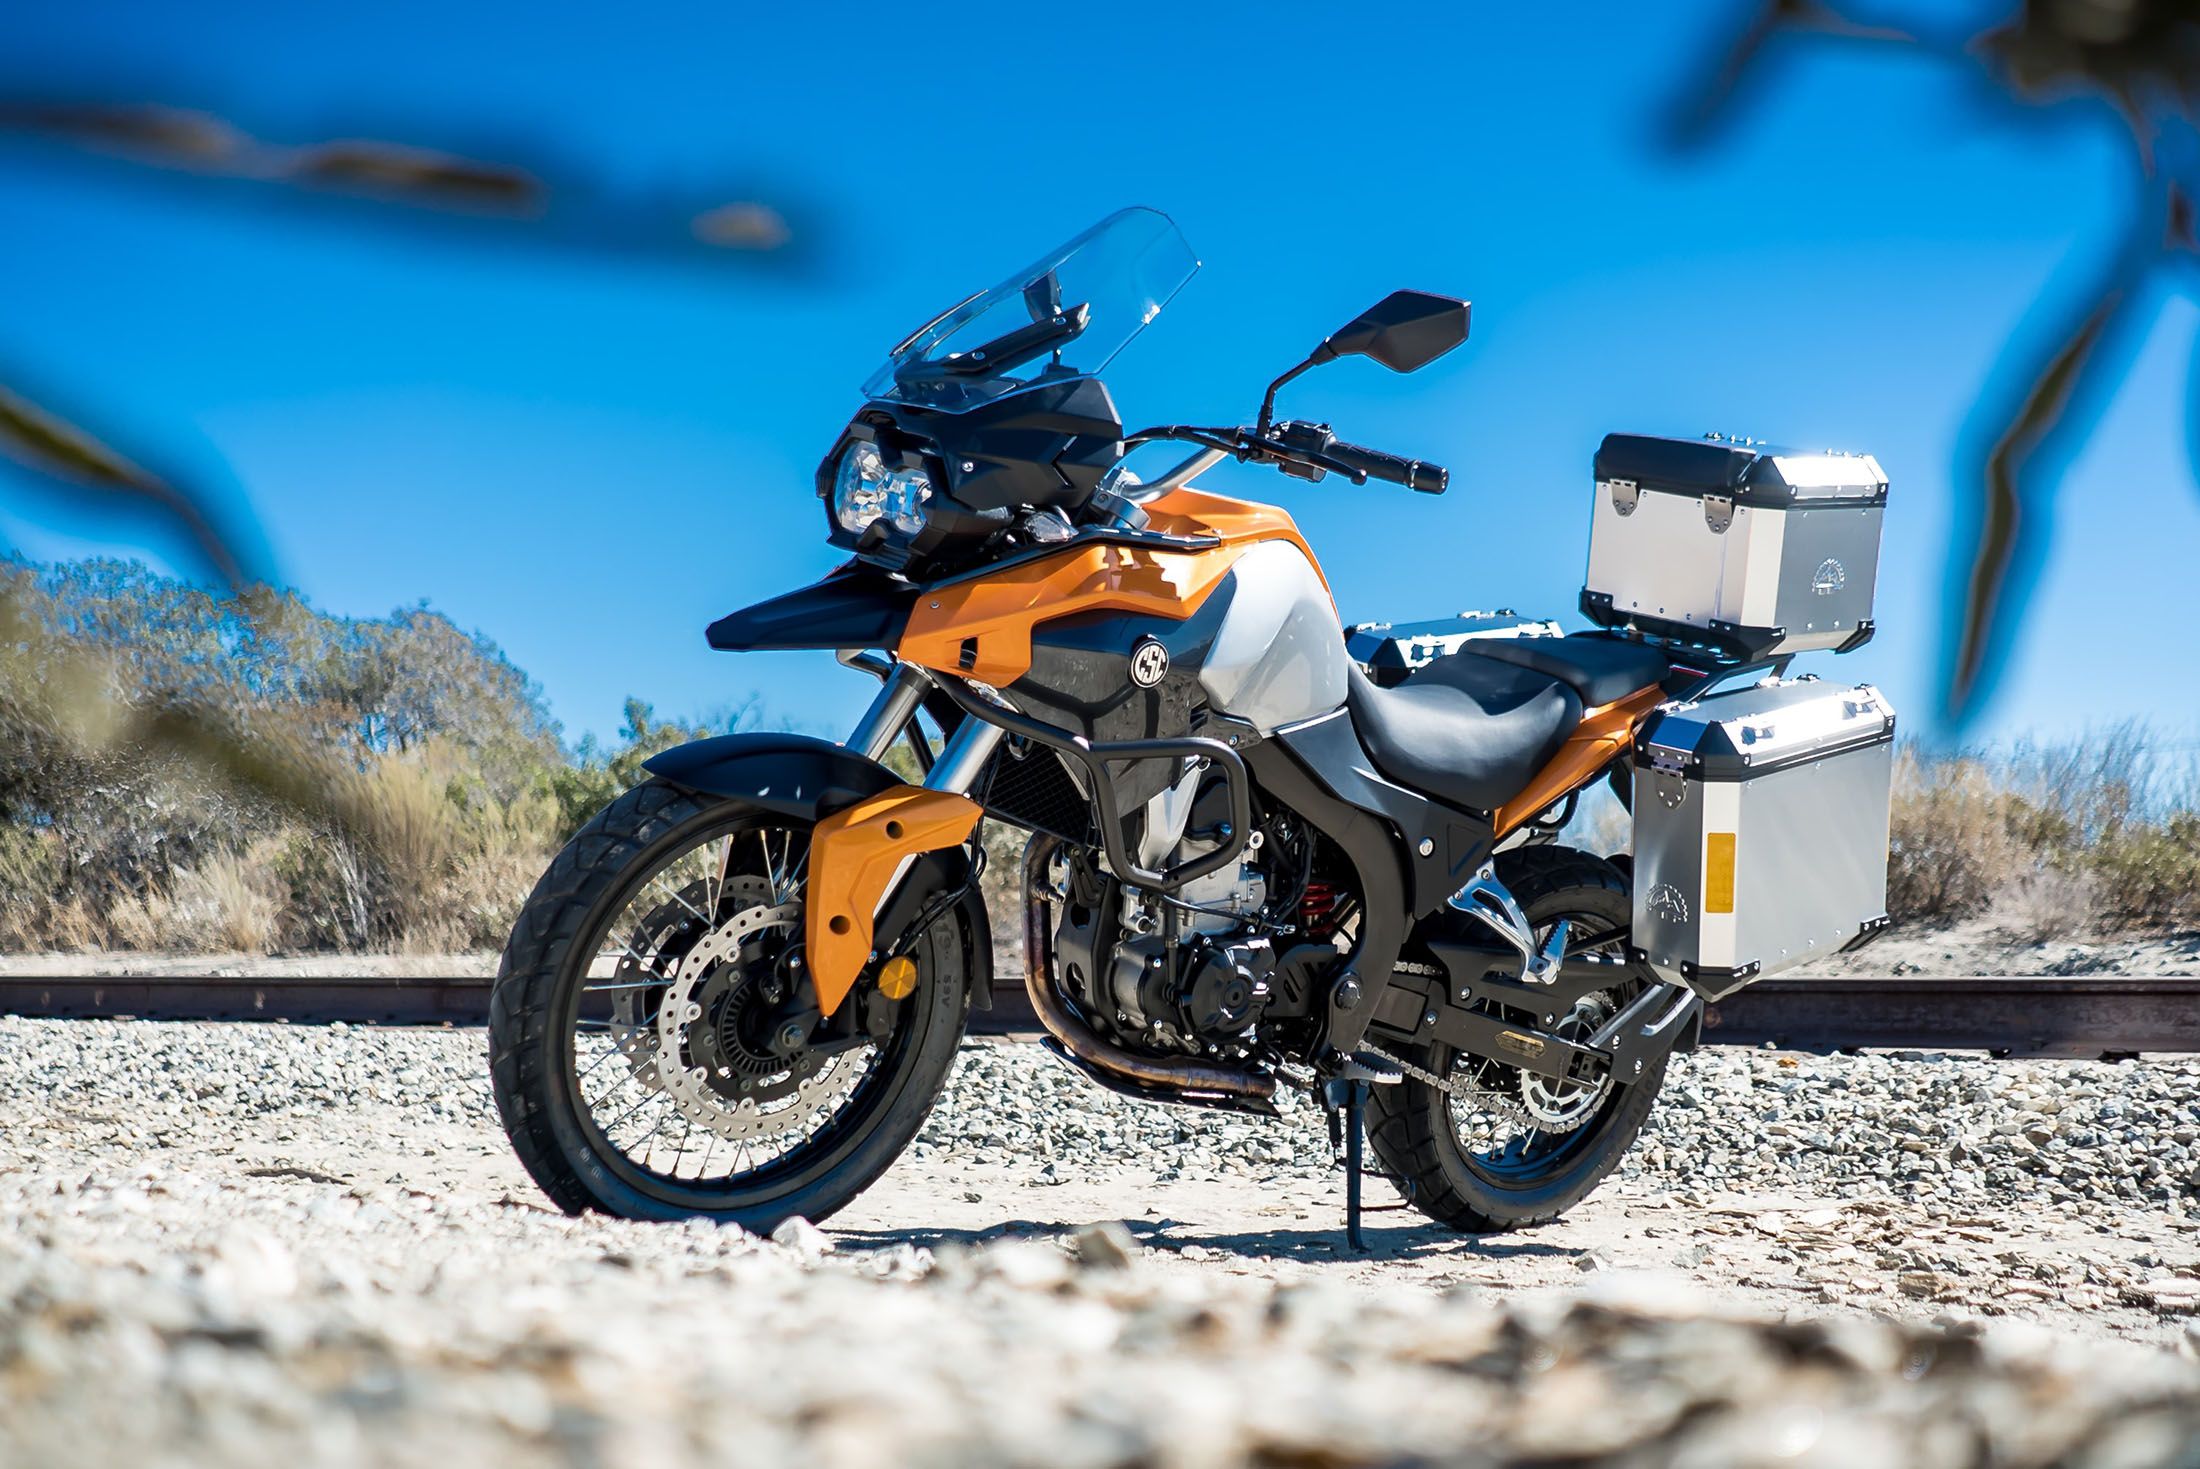 CSC Motorcycles Announces 2020 RX4 Adventure Motorcycle - Your